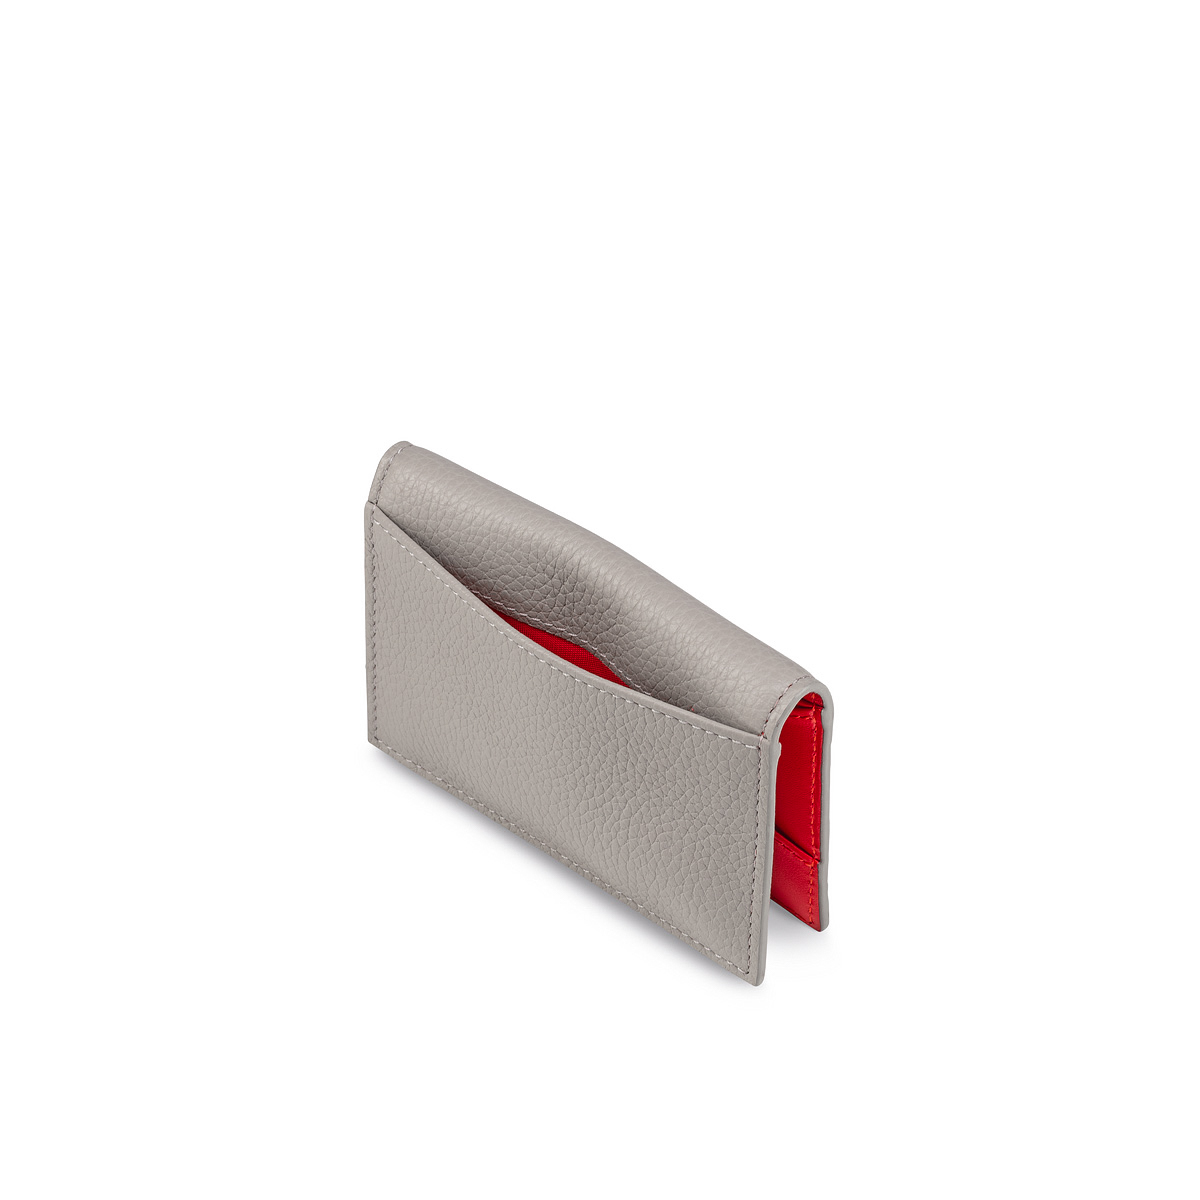 CHRISTIAN LOUBOUTIN: Sifnos Spike credit card holder in grained